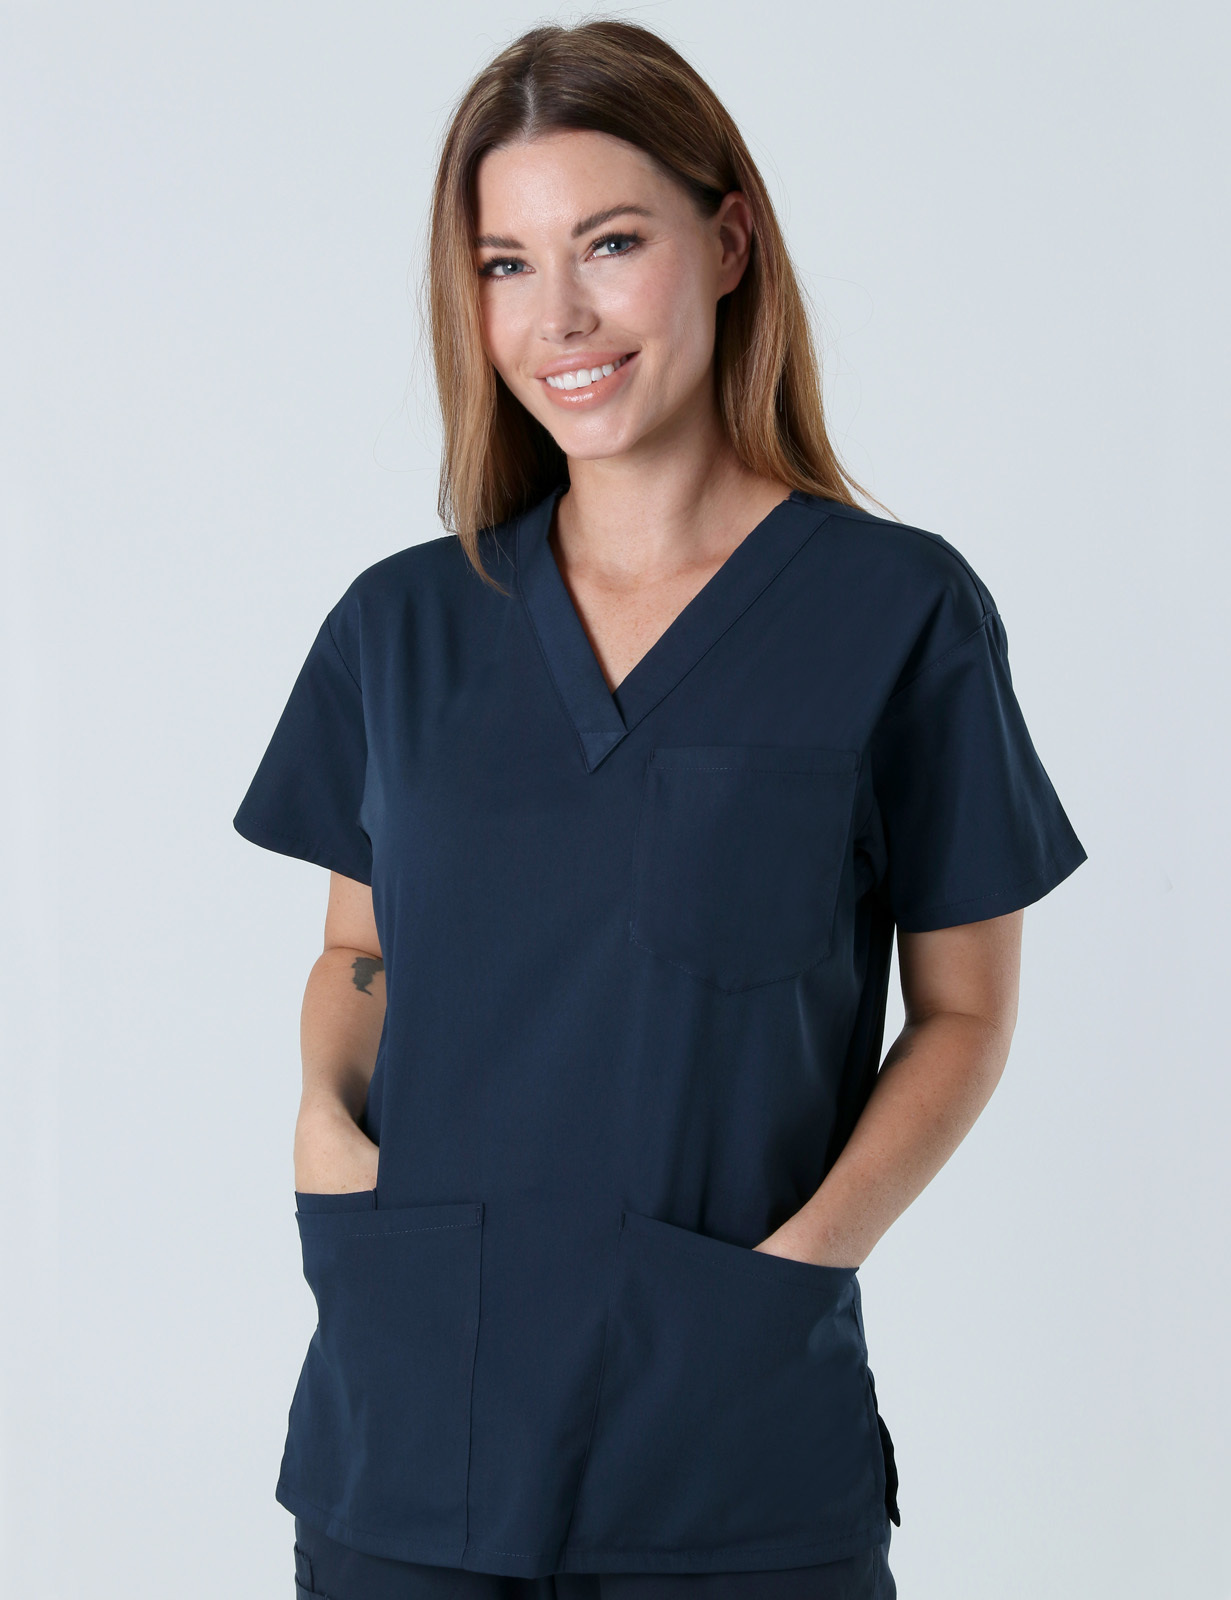 PAH - ED Doctor (4 Pocket Scrub Top and Cargo Pants in Navy incl Logos)